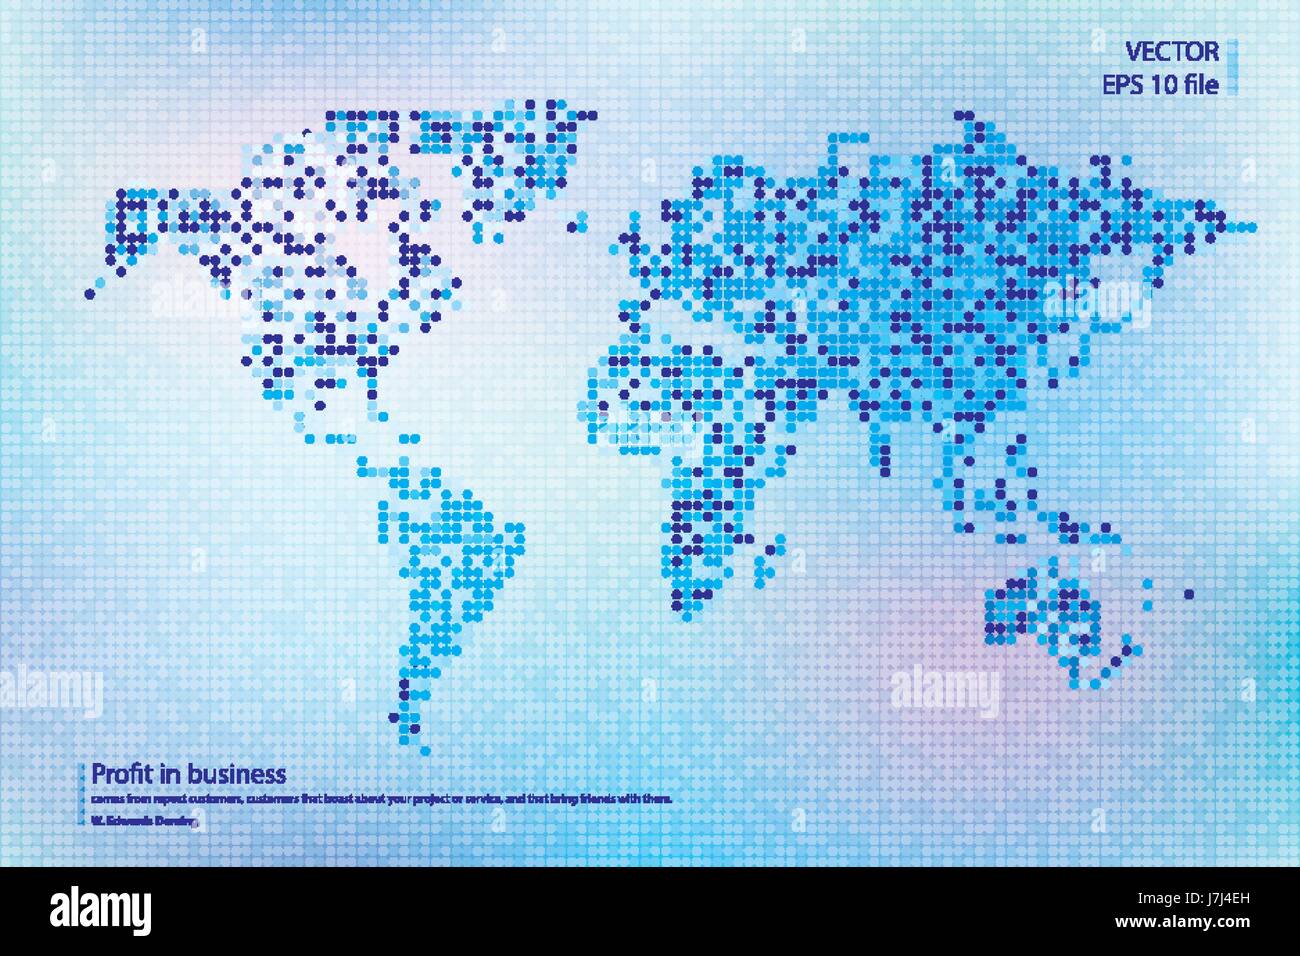 Dotted world map vector illustration. Business concept about world map global elements. Blue technology colors Stock Vector